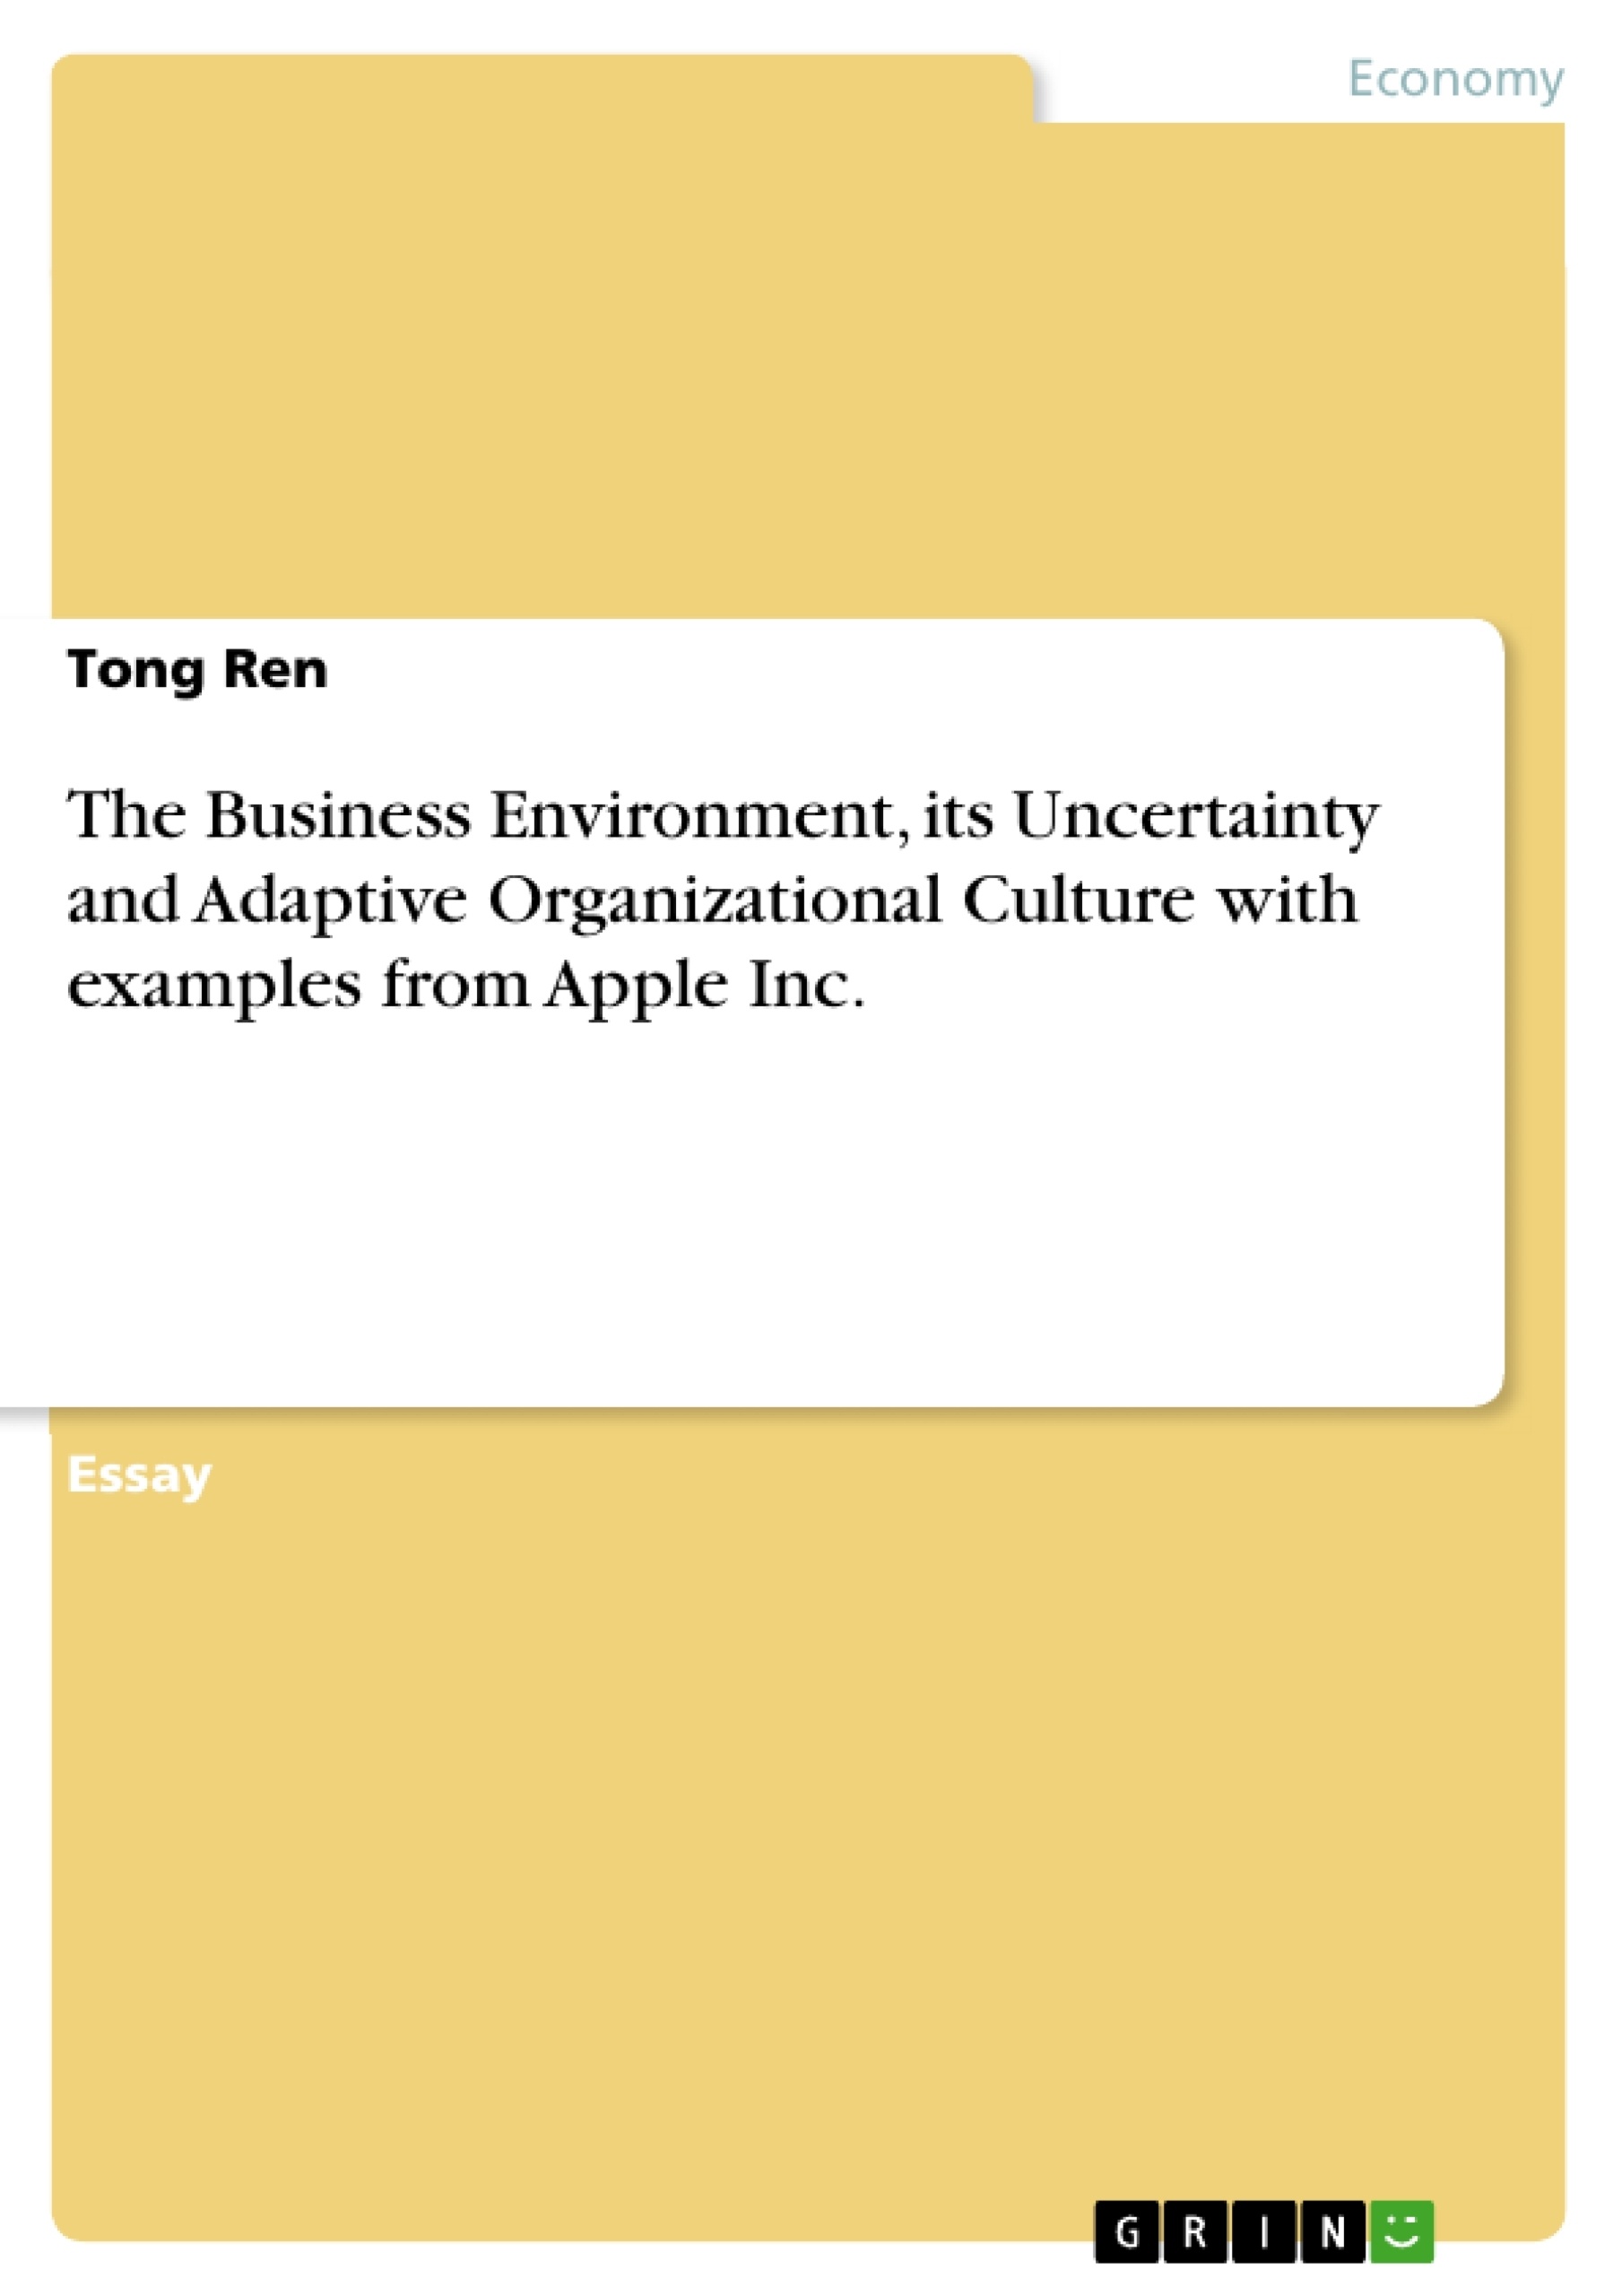 Title: The Business Environment, its Uncertainty and Adaptive Organizational Culture with examples from Apple Inc.